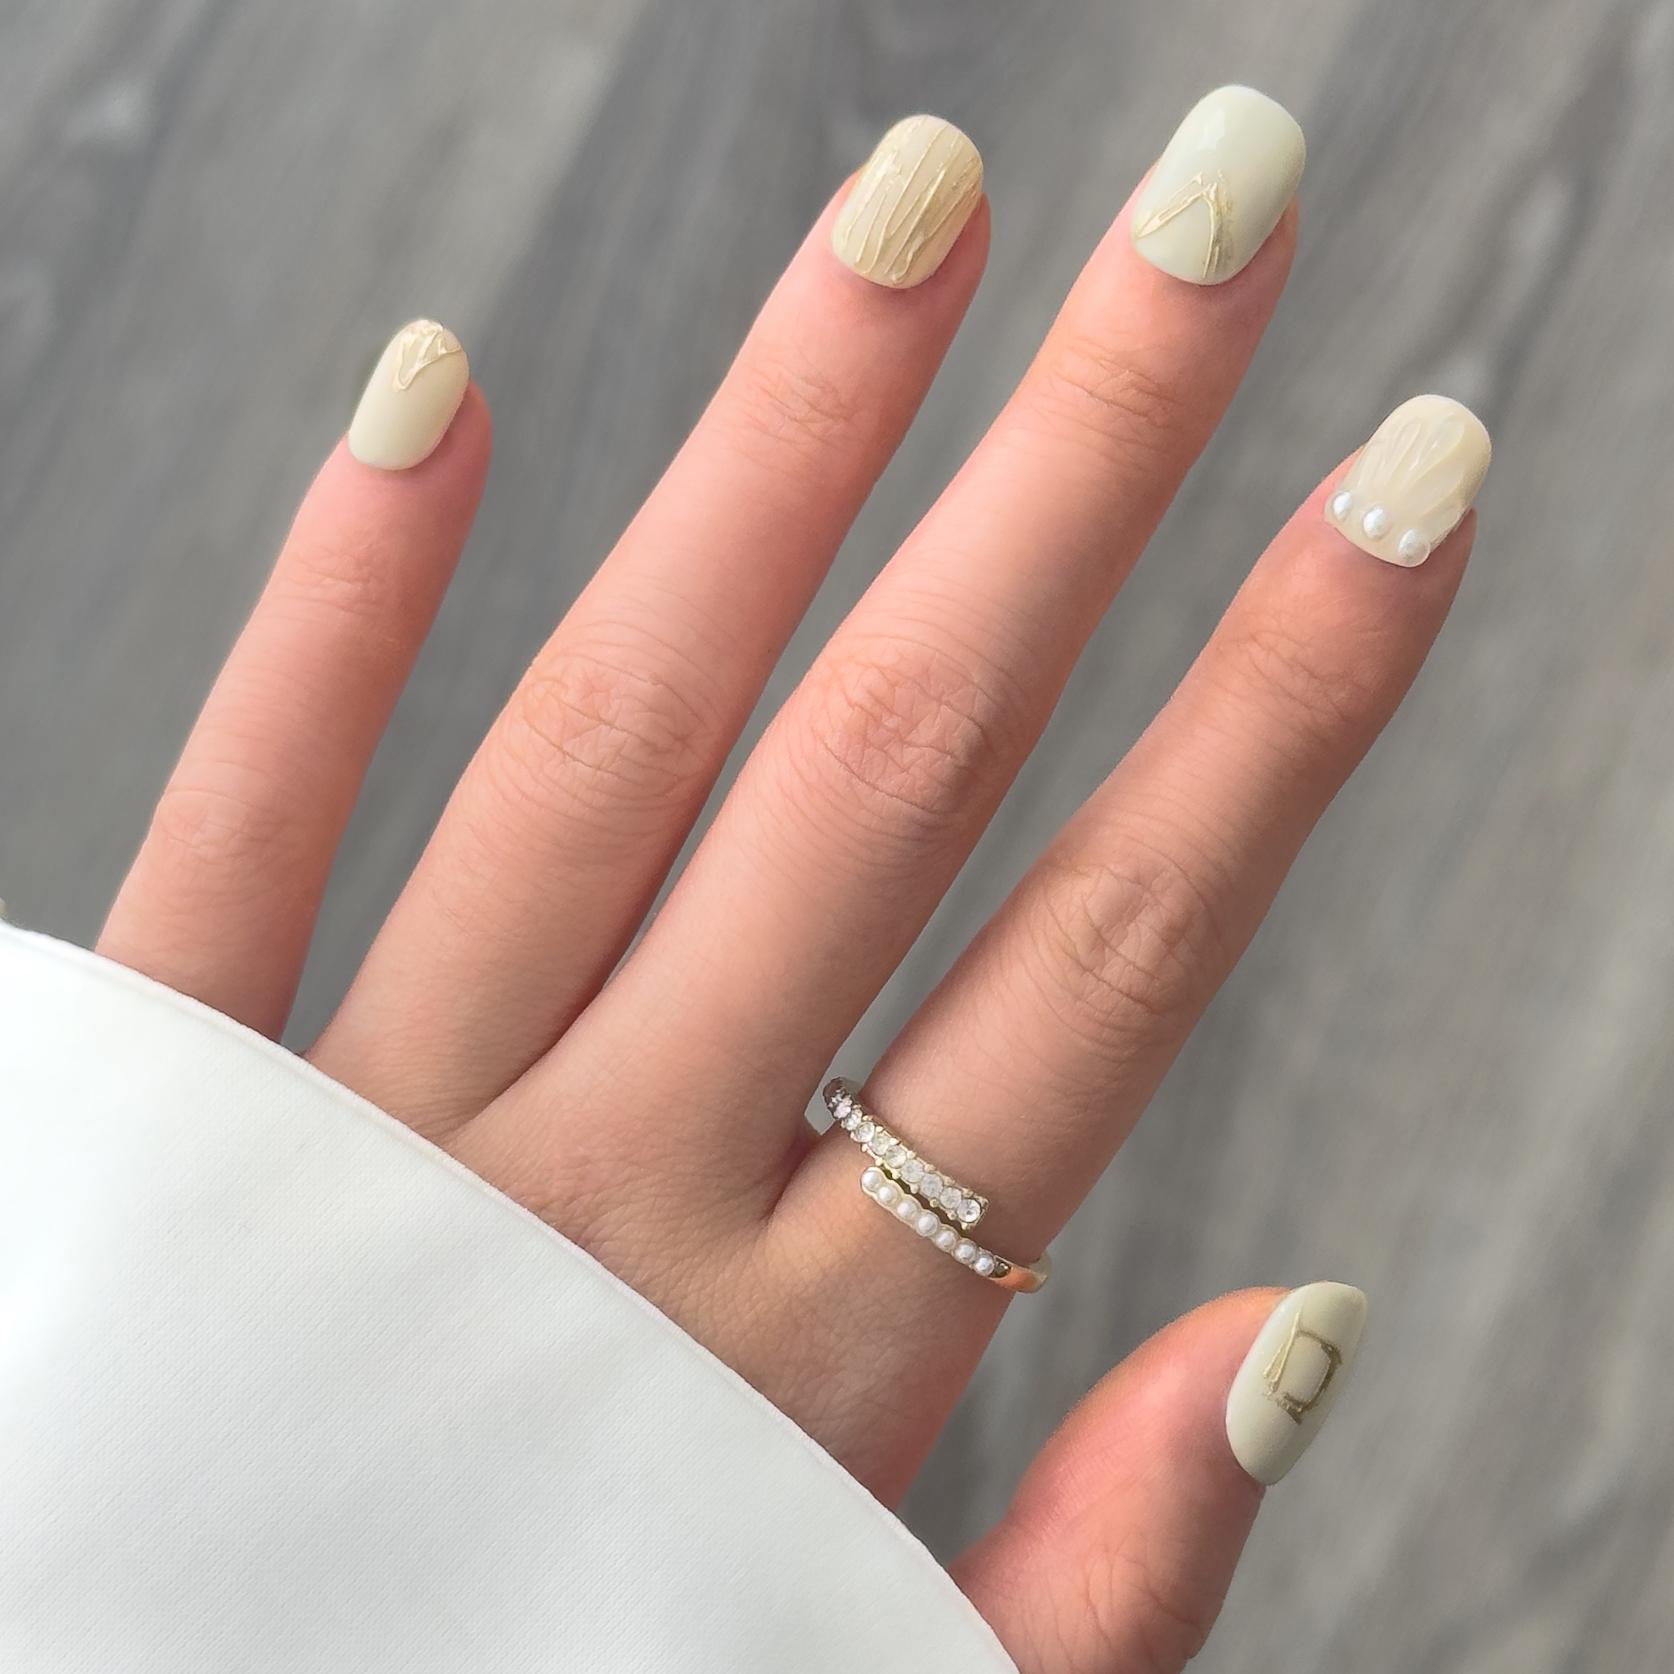 Close-up of a hand wearing MyLilith's press-on nails with a minimalist design, featuring matte beige nails with subtle gold accents and pearl details on one nail, in a short squoval shape.